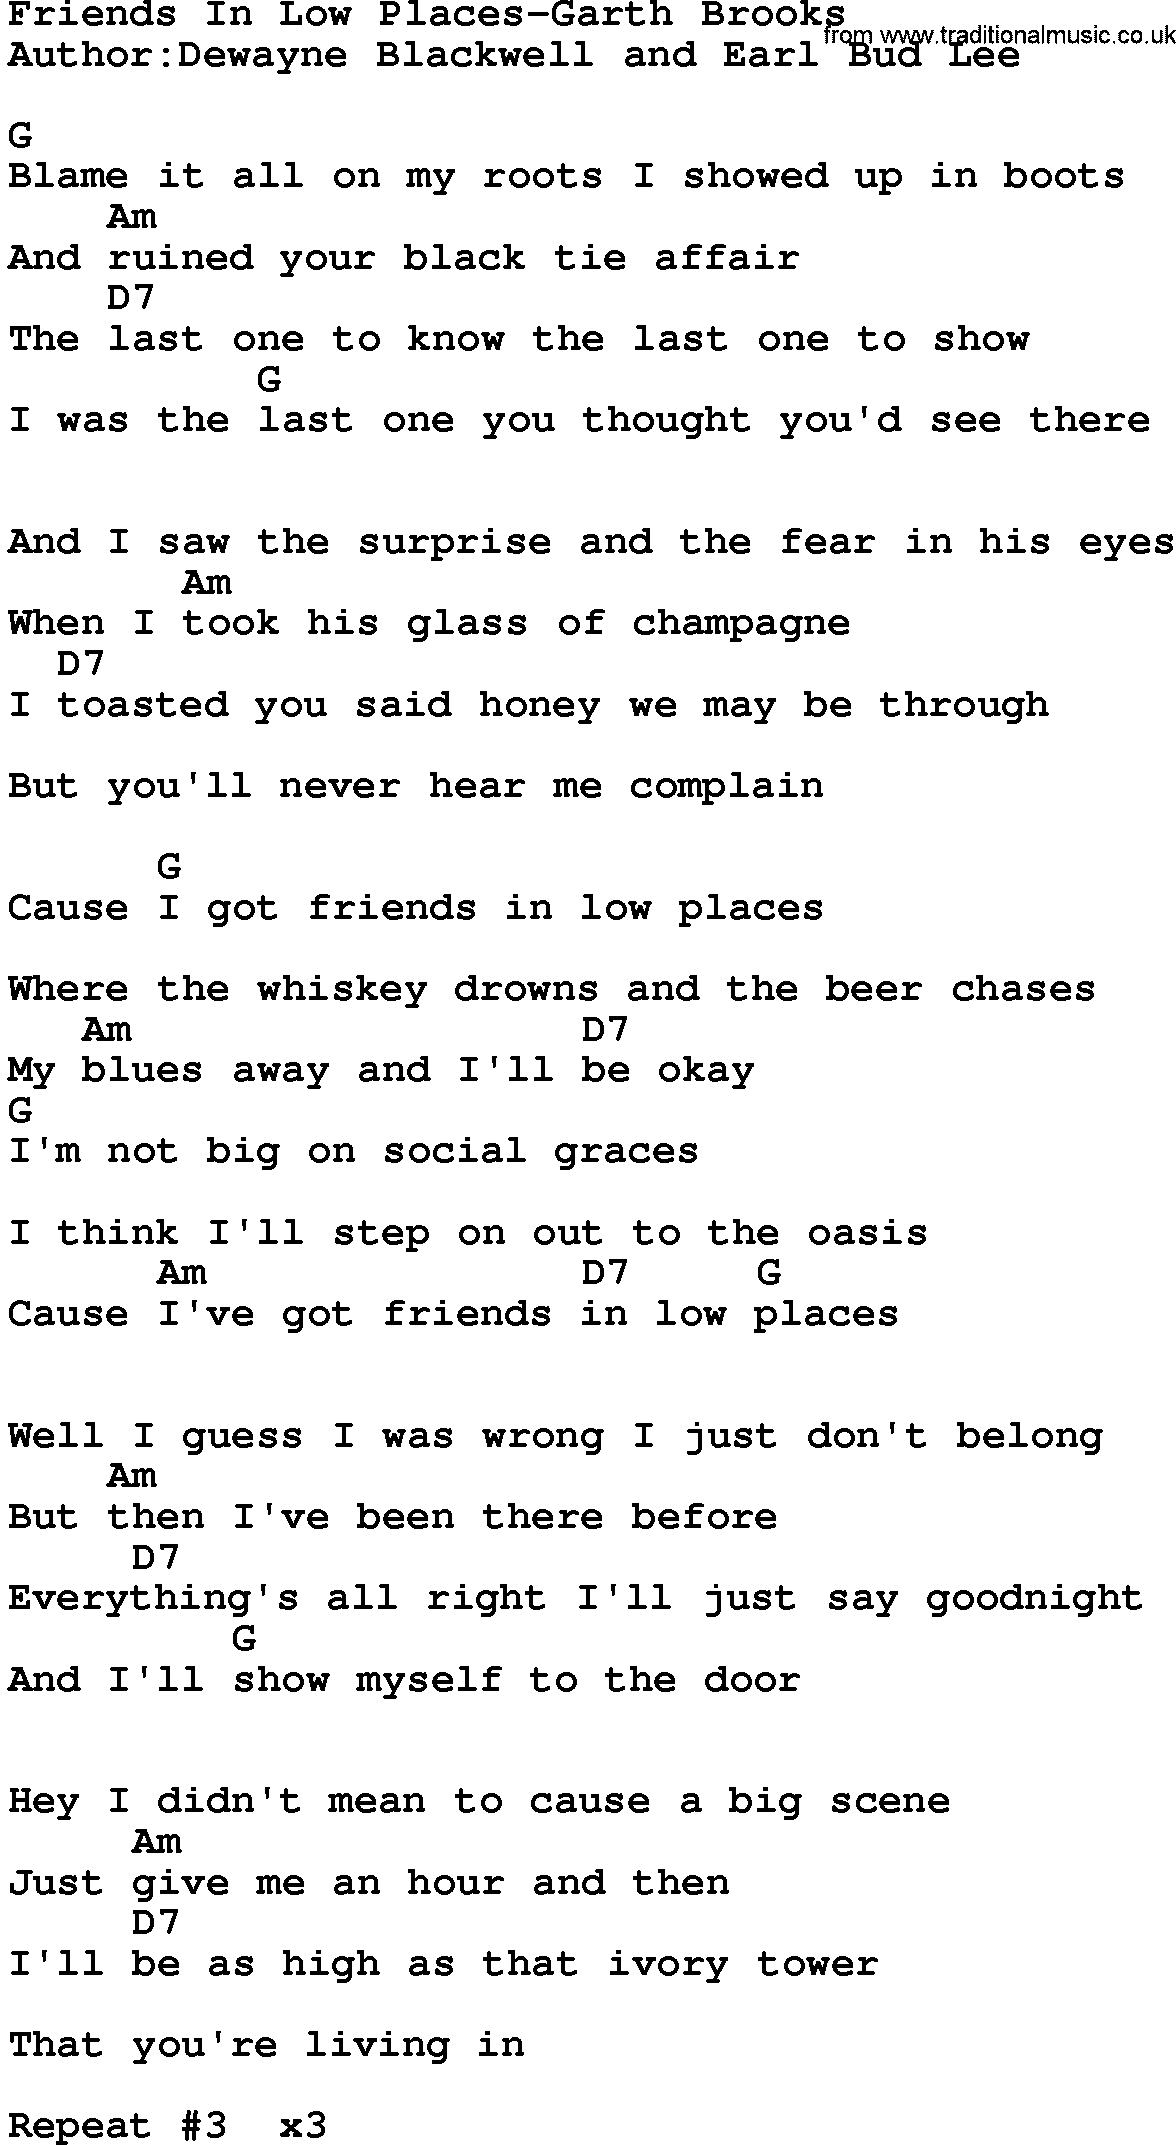 Friends In Low Places Chords Country Musicfriends In Low Places Garth Brooks Lyrics And Chords